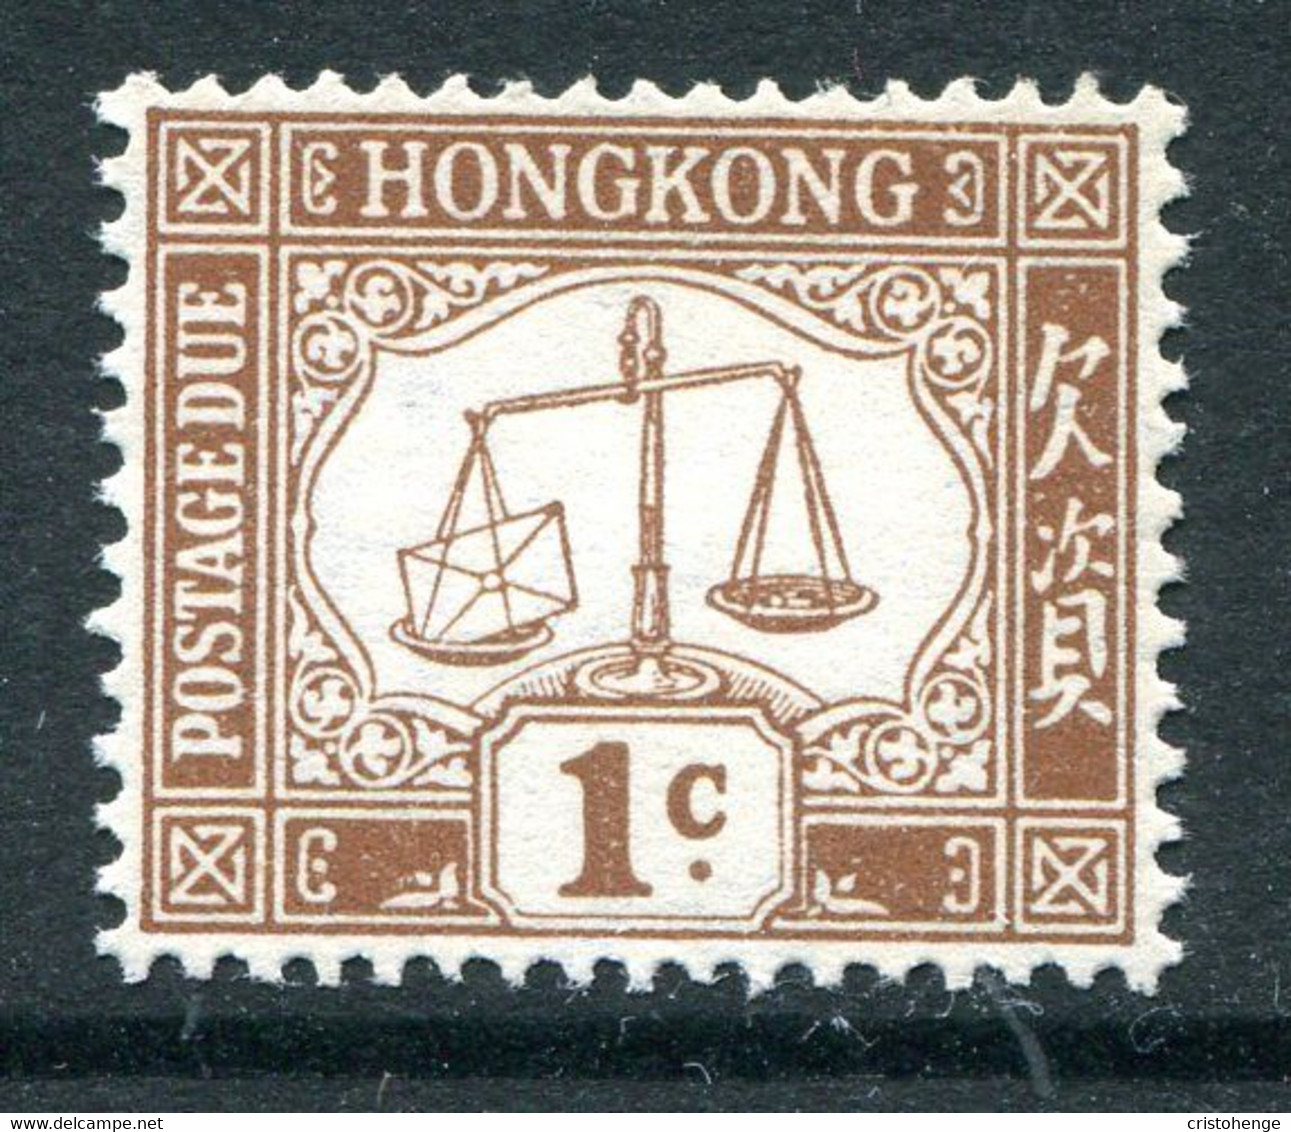 Hong Kong 1923-56 Postage Dues - 1c Brown - Wmk. Sideways - MNH (SG D1a) - Timbres-taxe